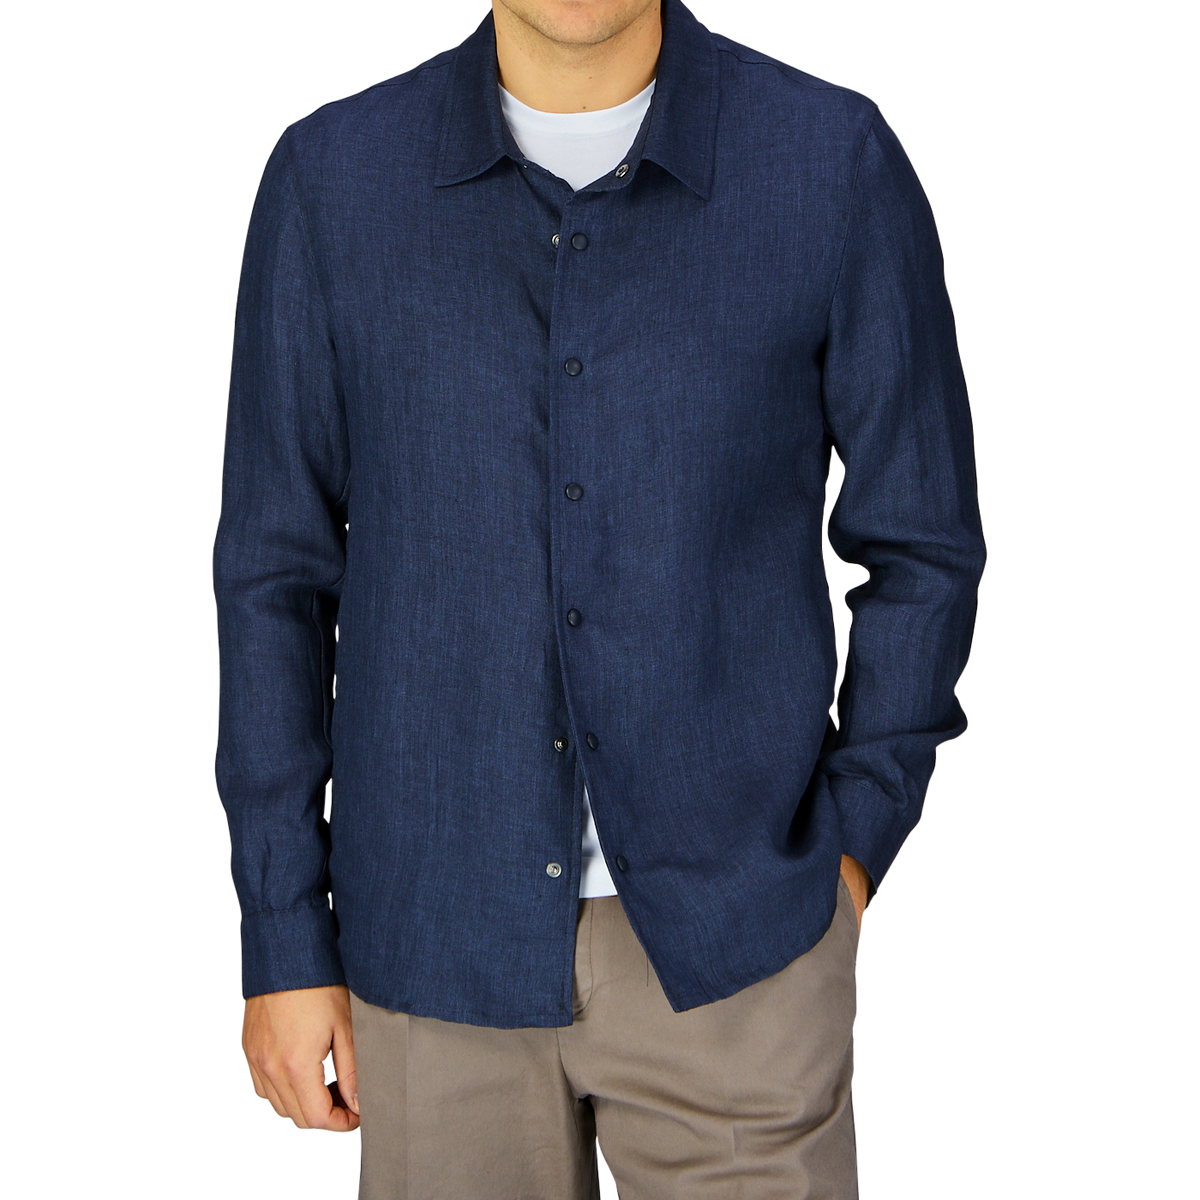 Man wearing a Mazzarelli Dark Blue Organic Linen Overshirt and beige pants, made in Italy.